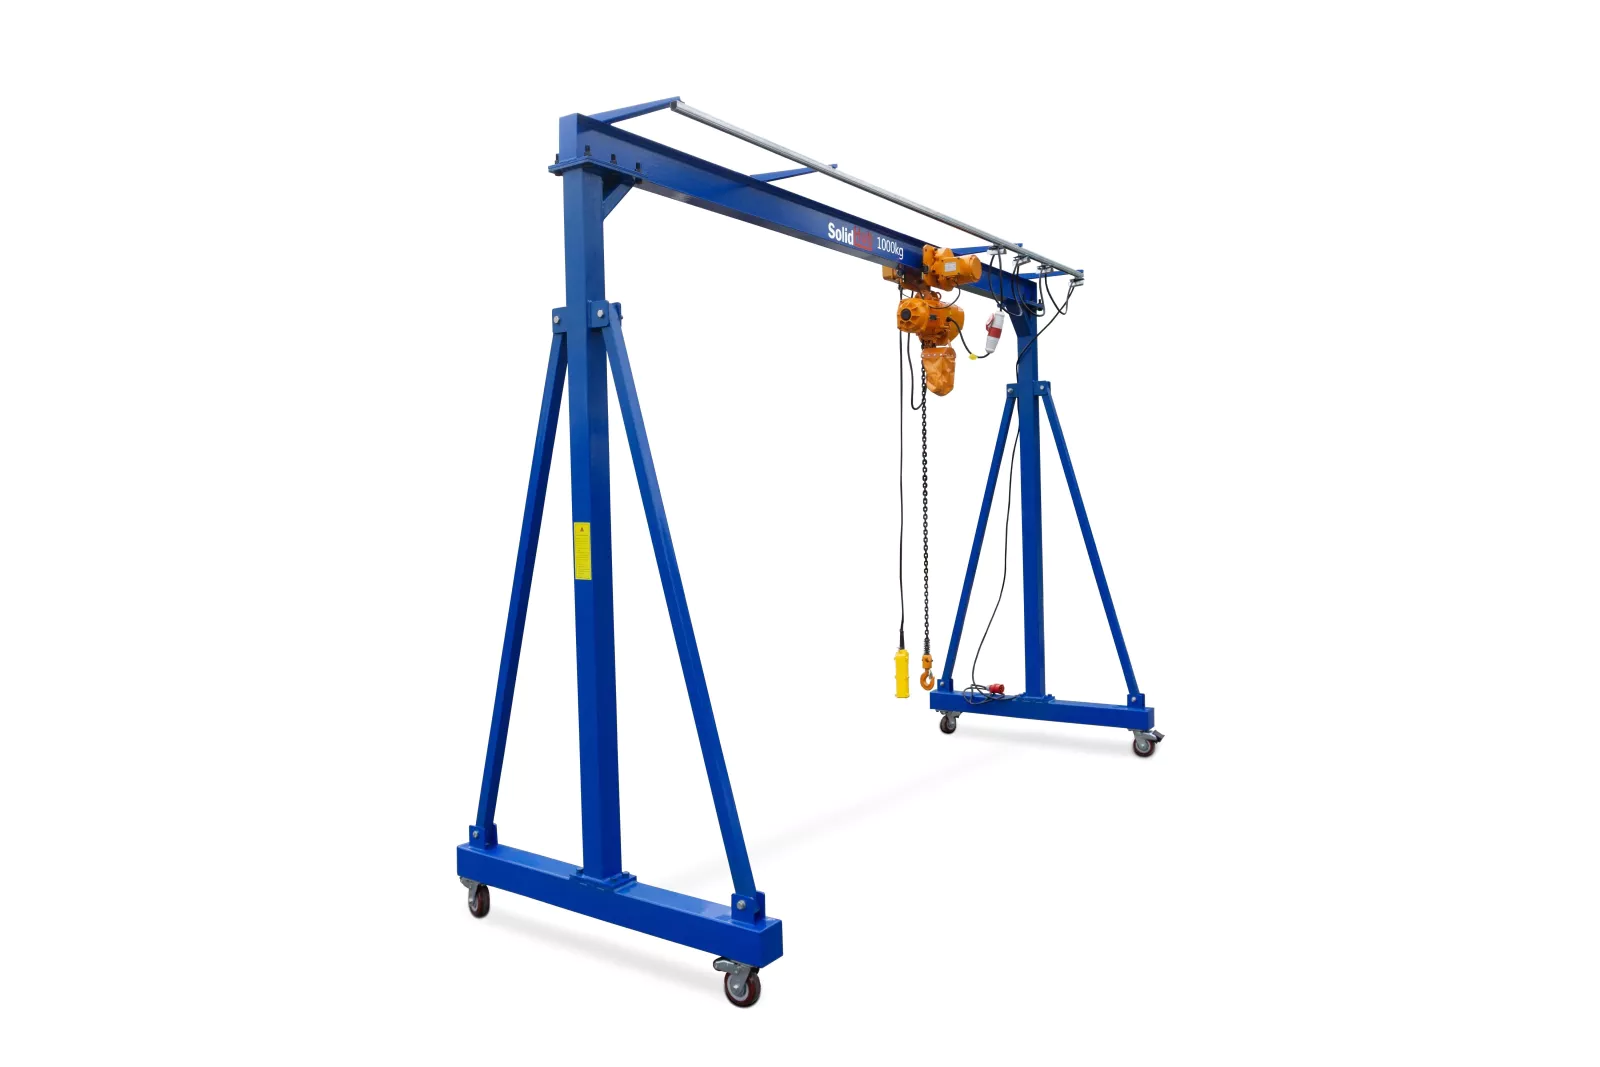 Gantry crane equipped with hoist and accessories